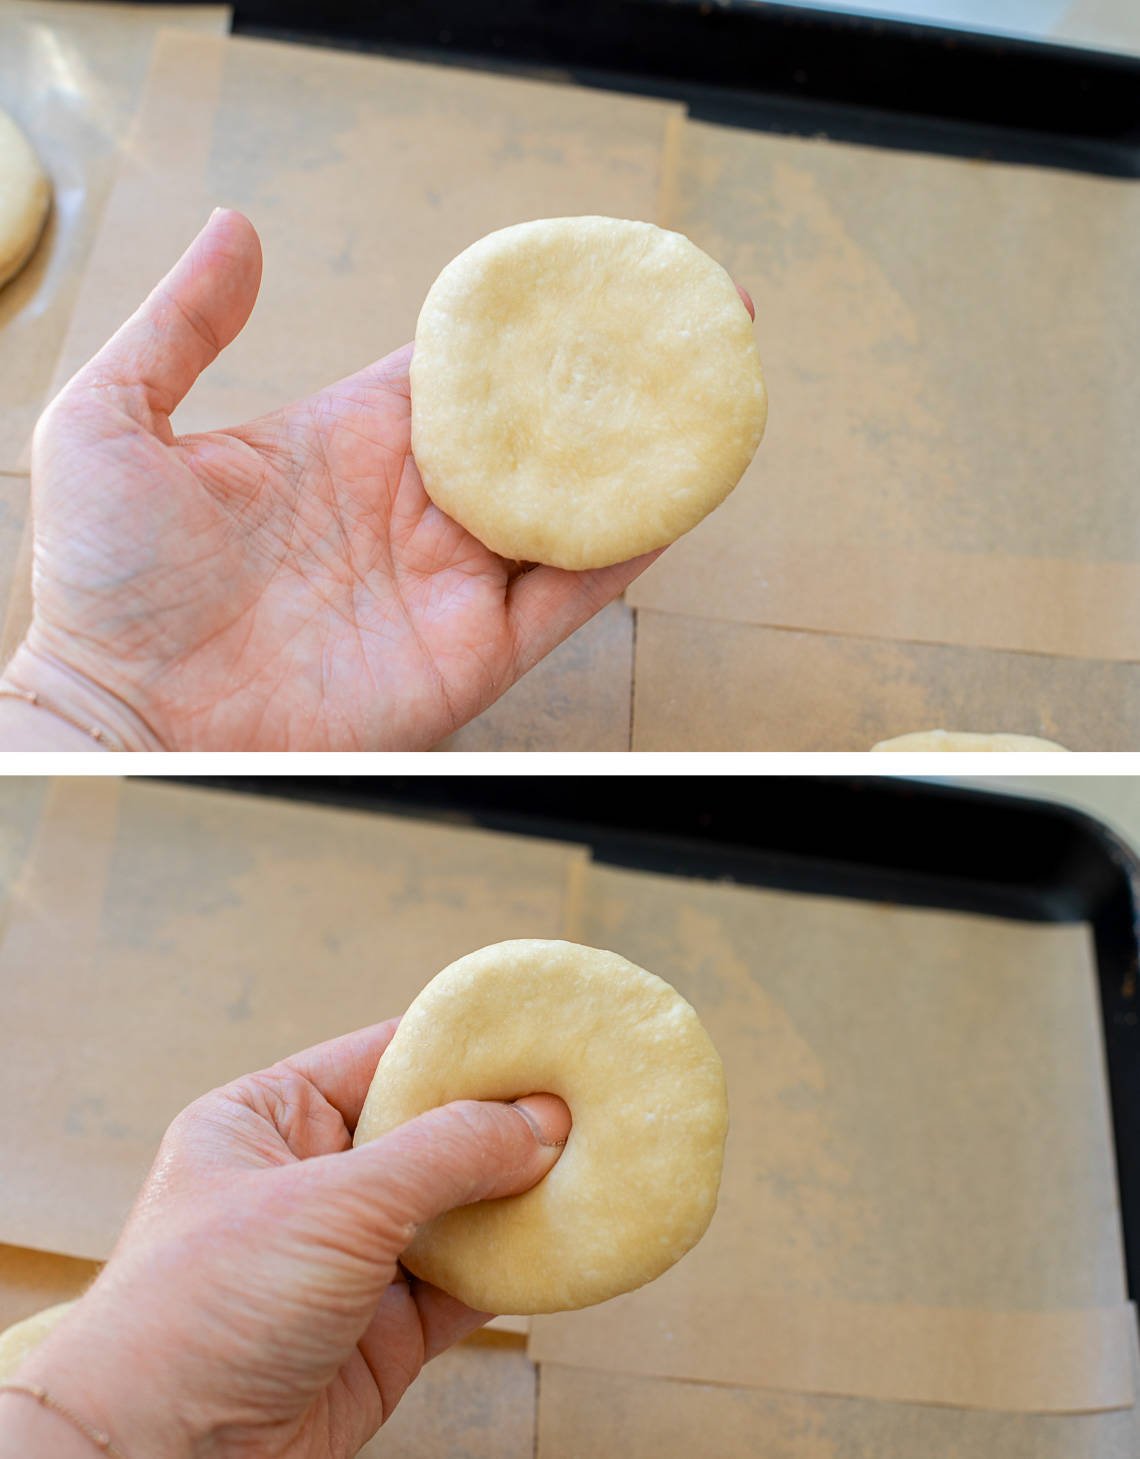 top flattened disk of dough about 3-4" wide and bottom pinching the disk to make hole.